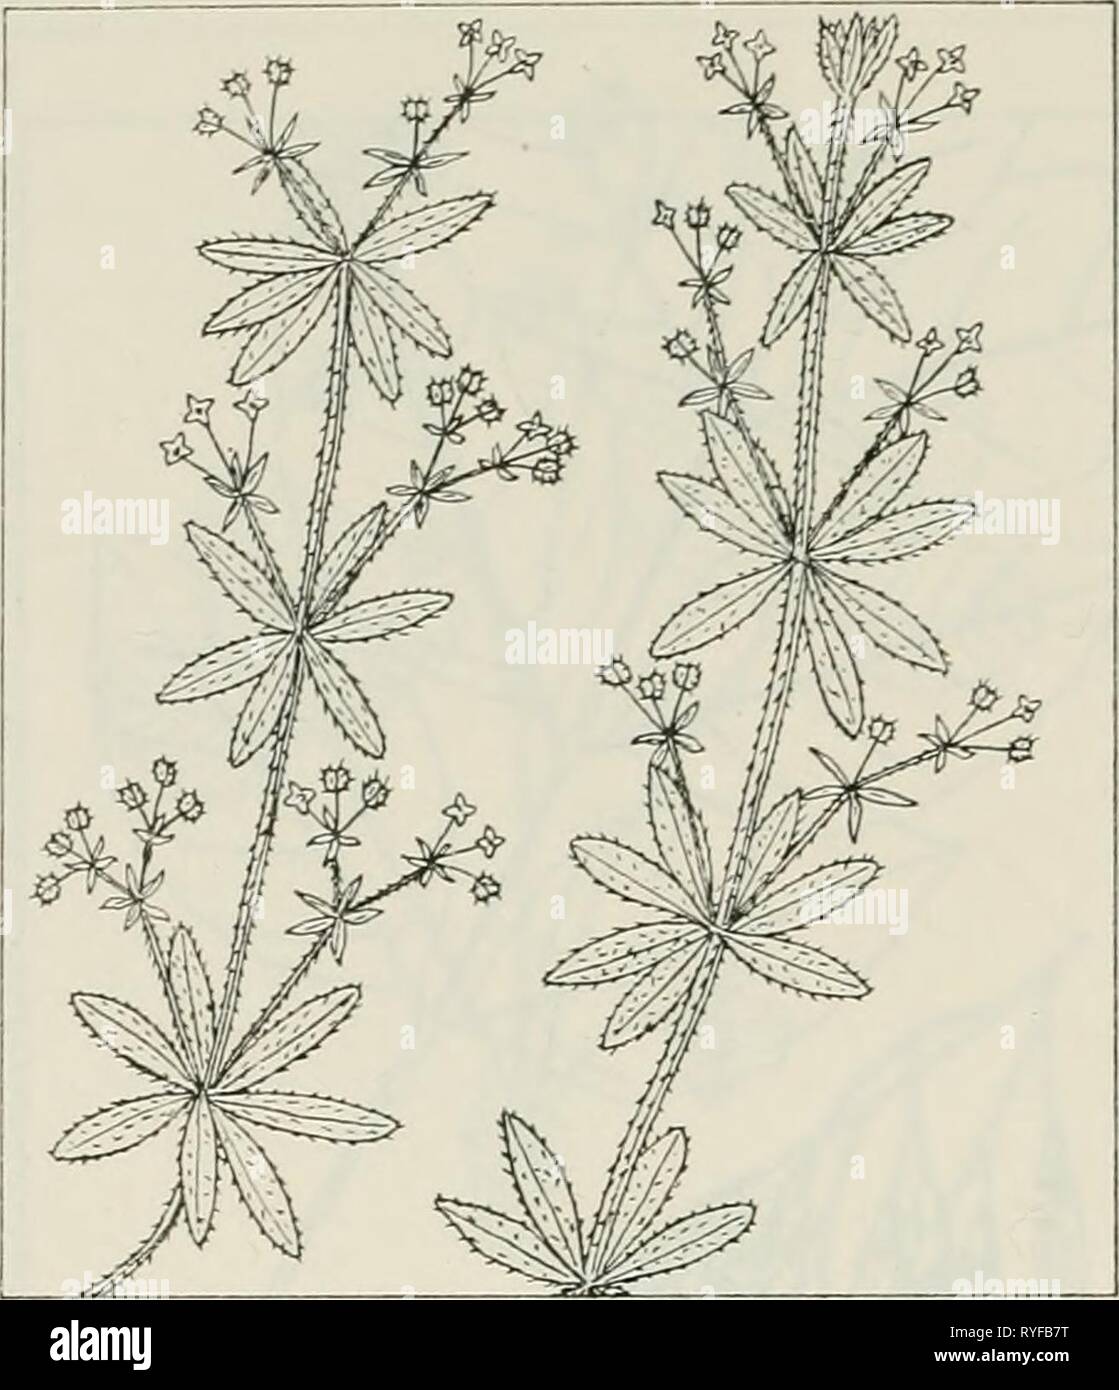 The drug plants of Illinois  drugplantsofilli44teho Year: 1951  58 ILLINOIS NATURAL HISTORY SURVEY Circular 44    GALIUM APARINE L. Cleaver's herb, cleavers, goose grass. Rubiaceae. —A low, weak, reclining or scrambling, prickly herb, annual; stem square, with recurved prickles, 2 to 5 feet long; leaves oblanceolate, 1 to 3 inches long, 6 or 8 at a node, hispid and rough on the margin and midrib; flowers white, small, in groups (1 to 3) on axillary peduncles; fruit appearing double, fleshy, covered with hooked prickles. The herb collected. Common through- out the state in gardens, along roads  Stock Photo